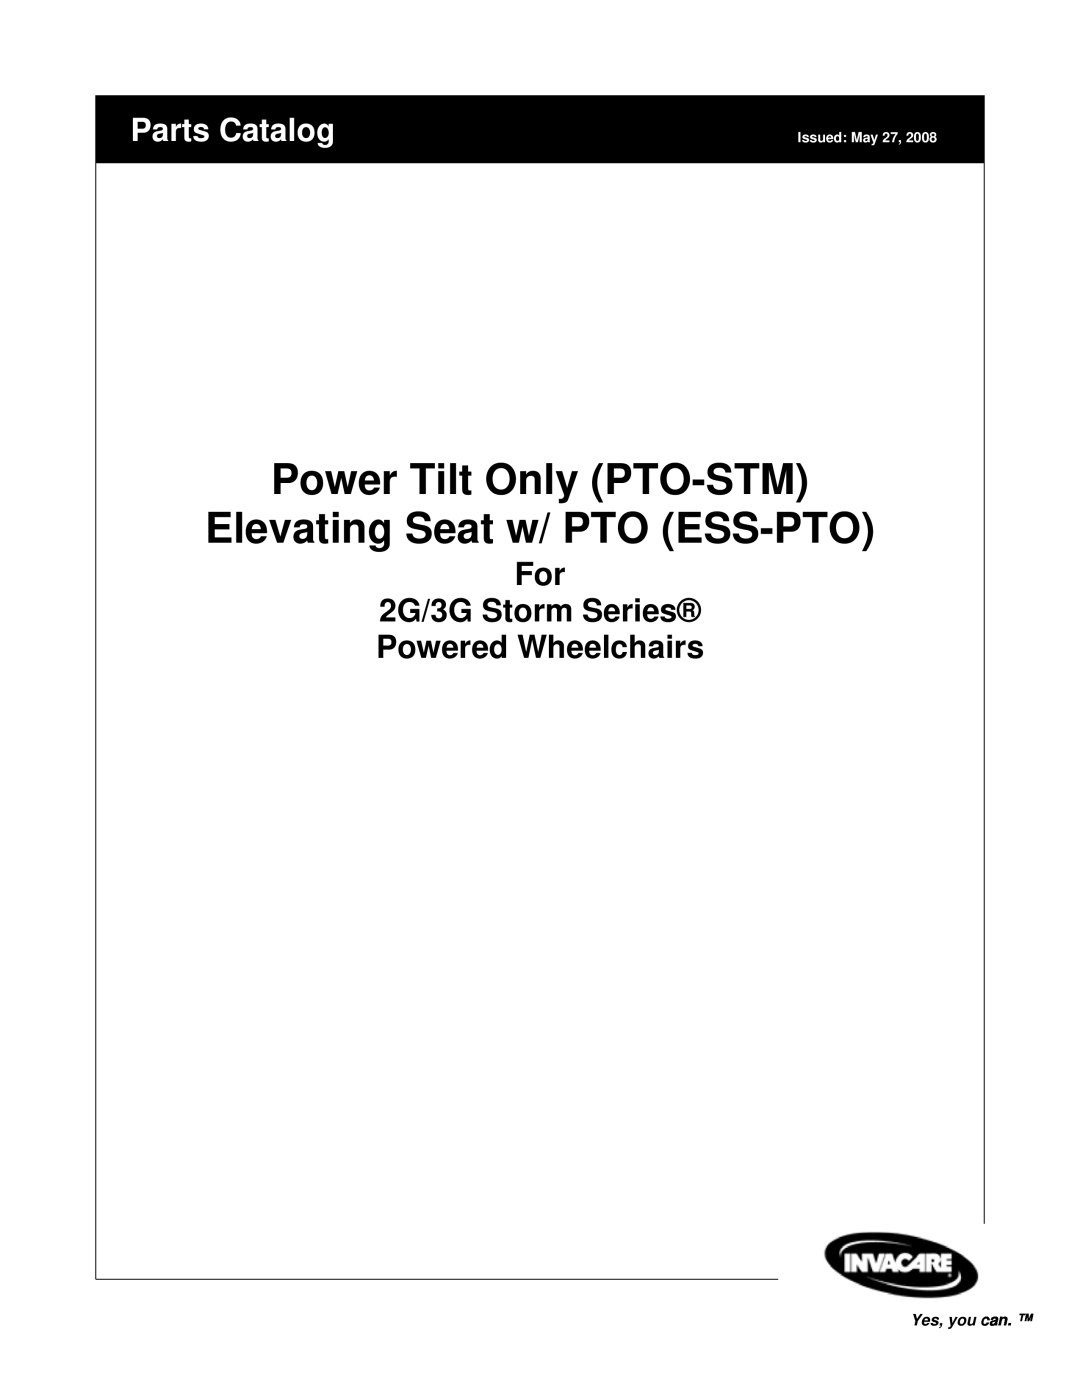 Invacare manual For 2G/3G Storm Series Powered Wheelchairs, Power Tilt Only PTO-STM Elevating Seat w/ PTO ESS-PTO 